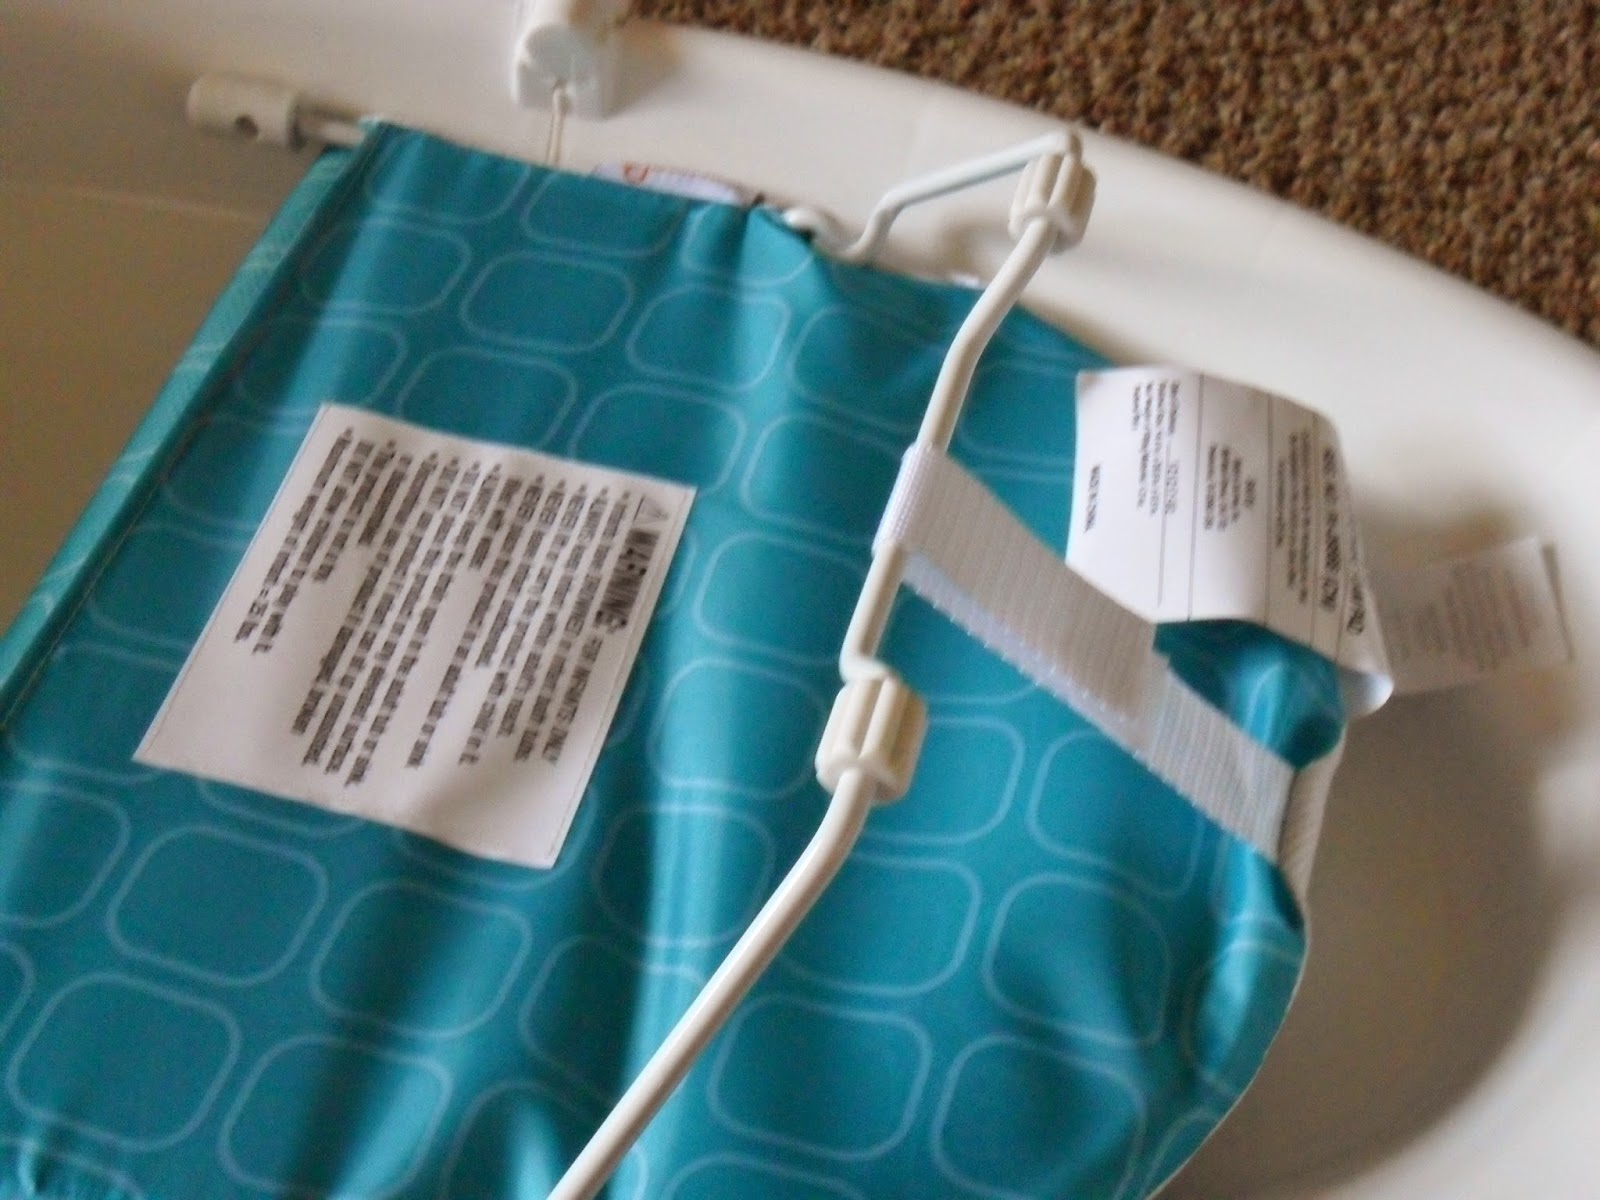 Making bath time safe with Baby's Journey. Easy Reach-Tub.  Review  (Blu me away or Pink of me Event)